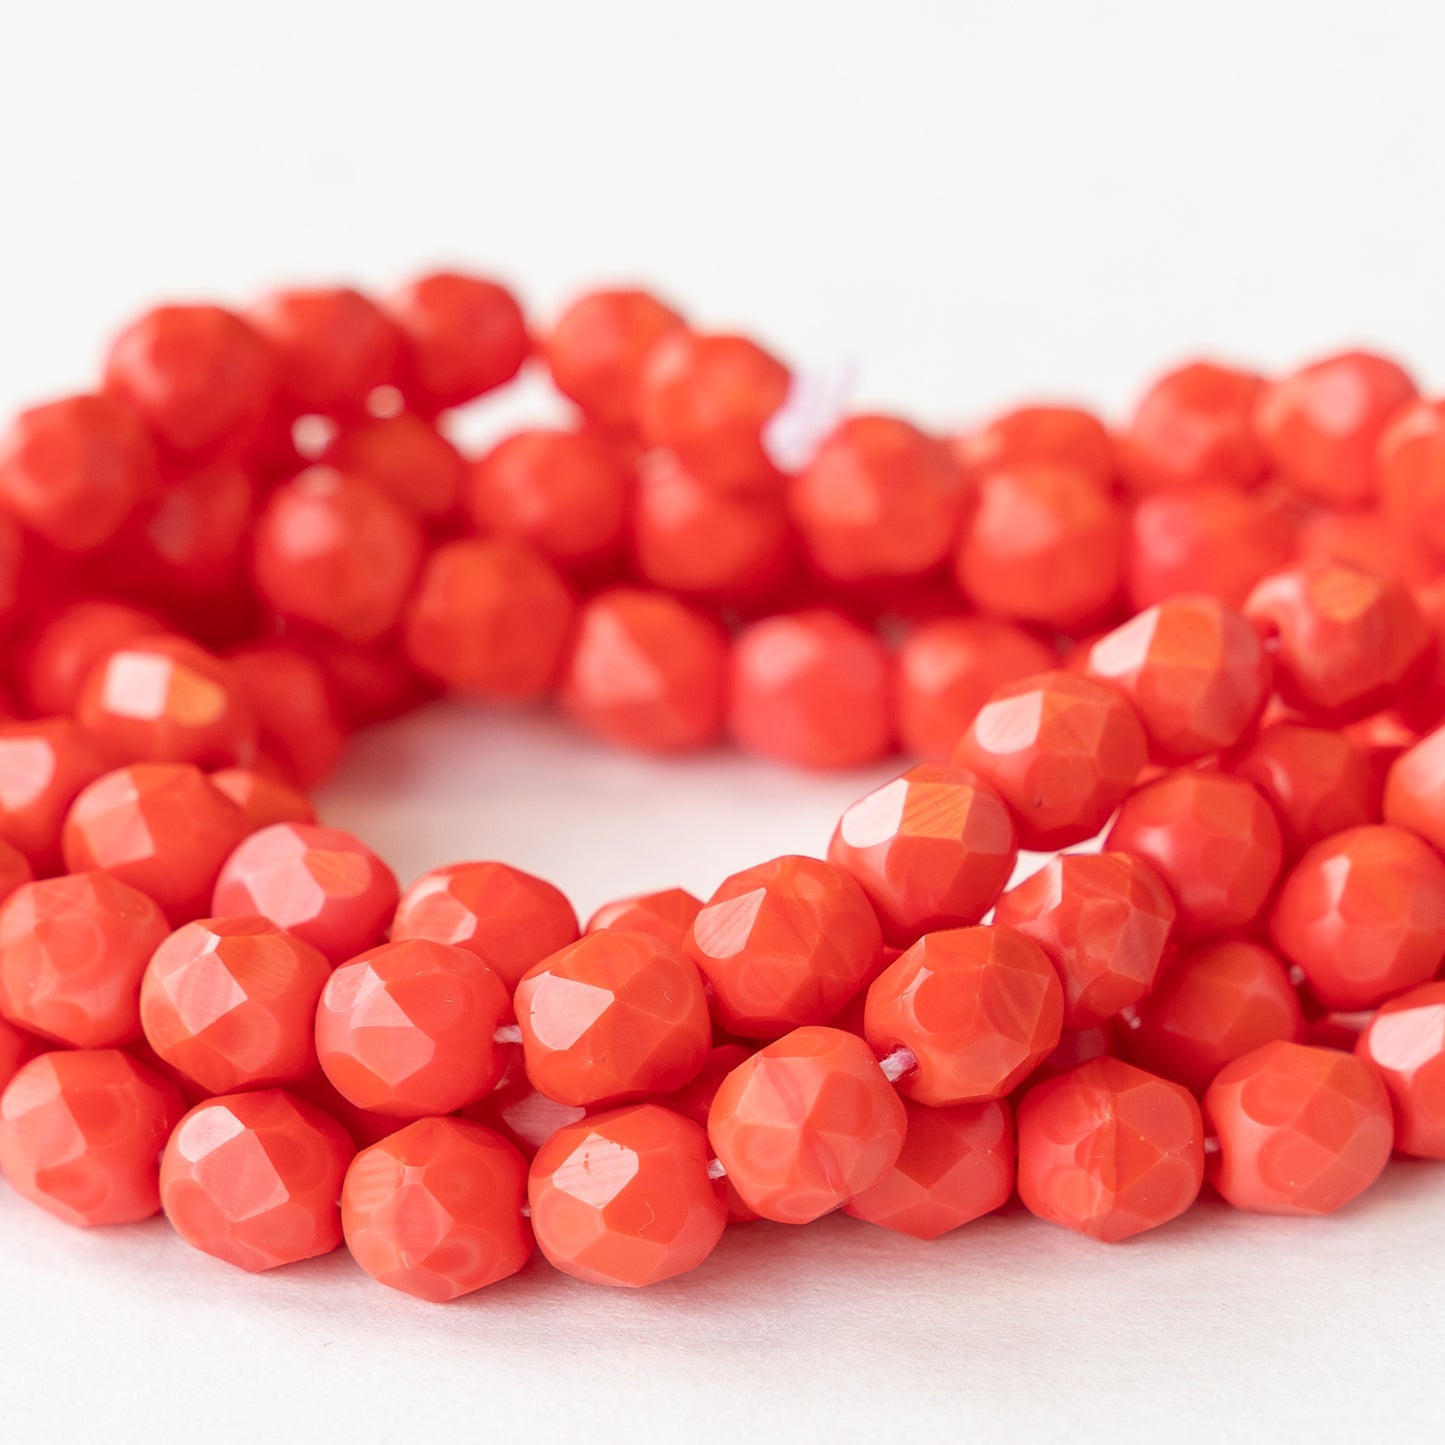 Load image into Gallery viewer, 6mm Round Firepolished Beads - Opaque Coral Red - 25 beads
